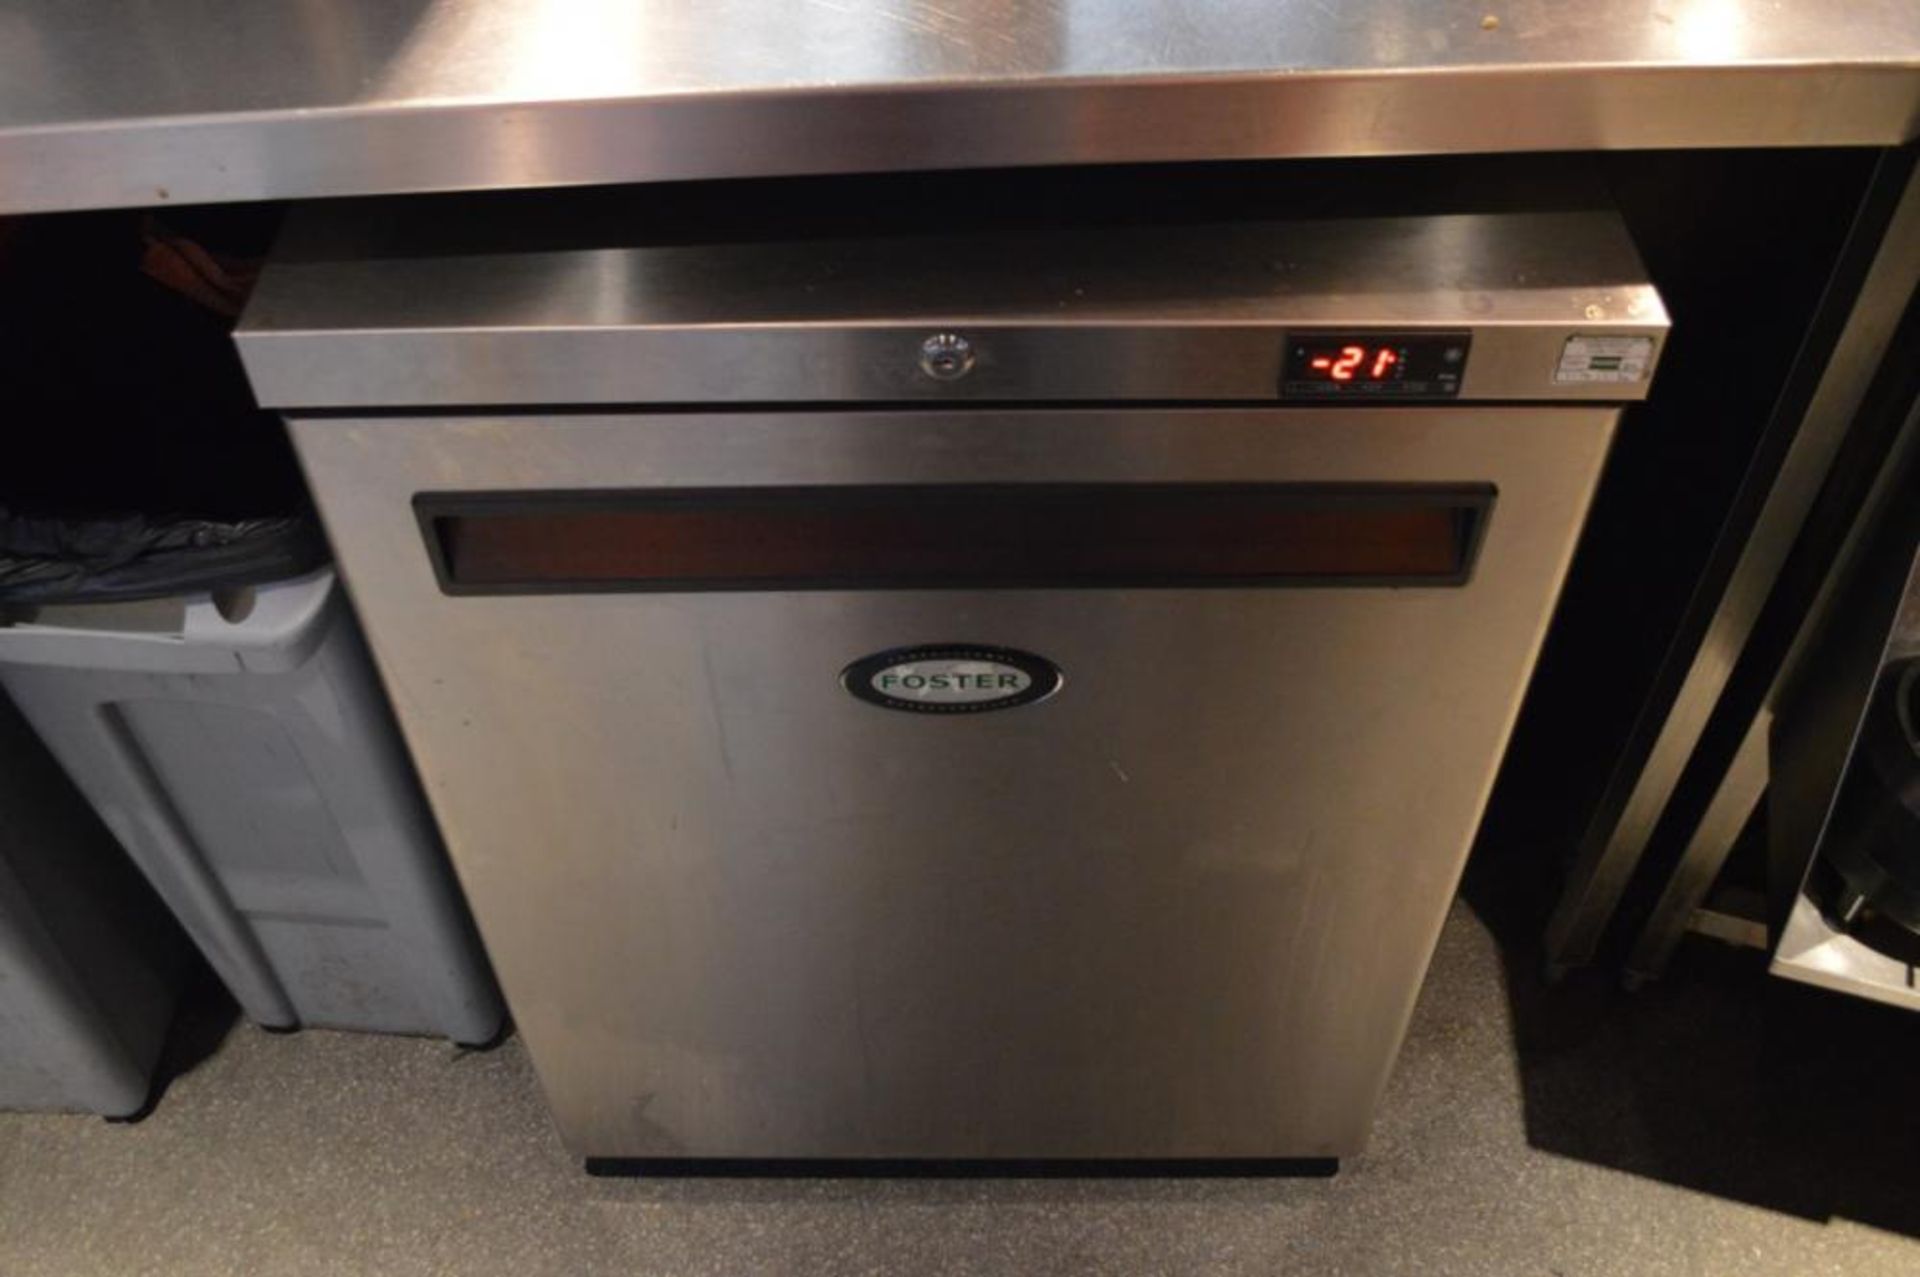 1 x Foster Undercounter Single Door Freezer With Stainless Steel Finish - Model LR150-A - H80 x - Image 3 of 4